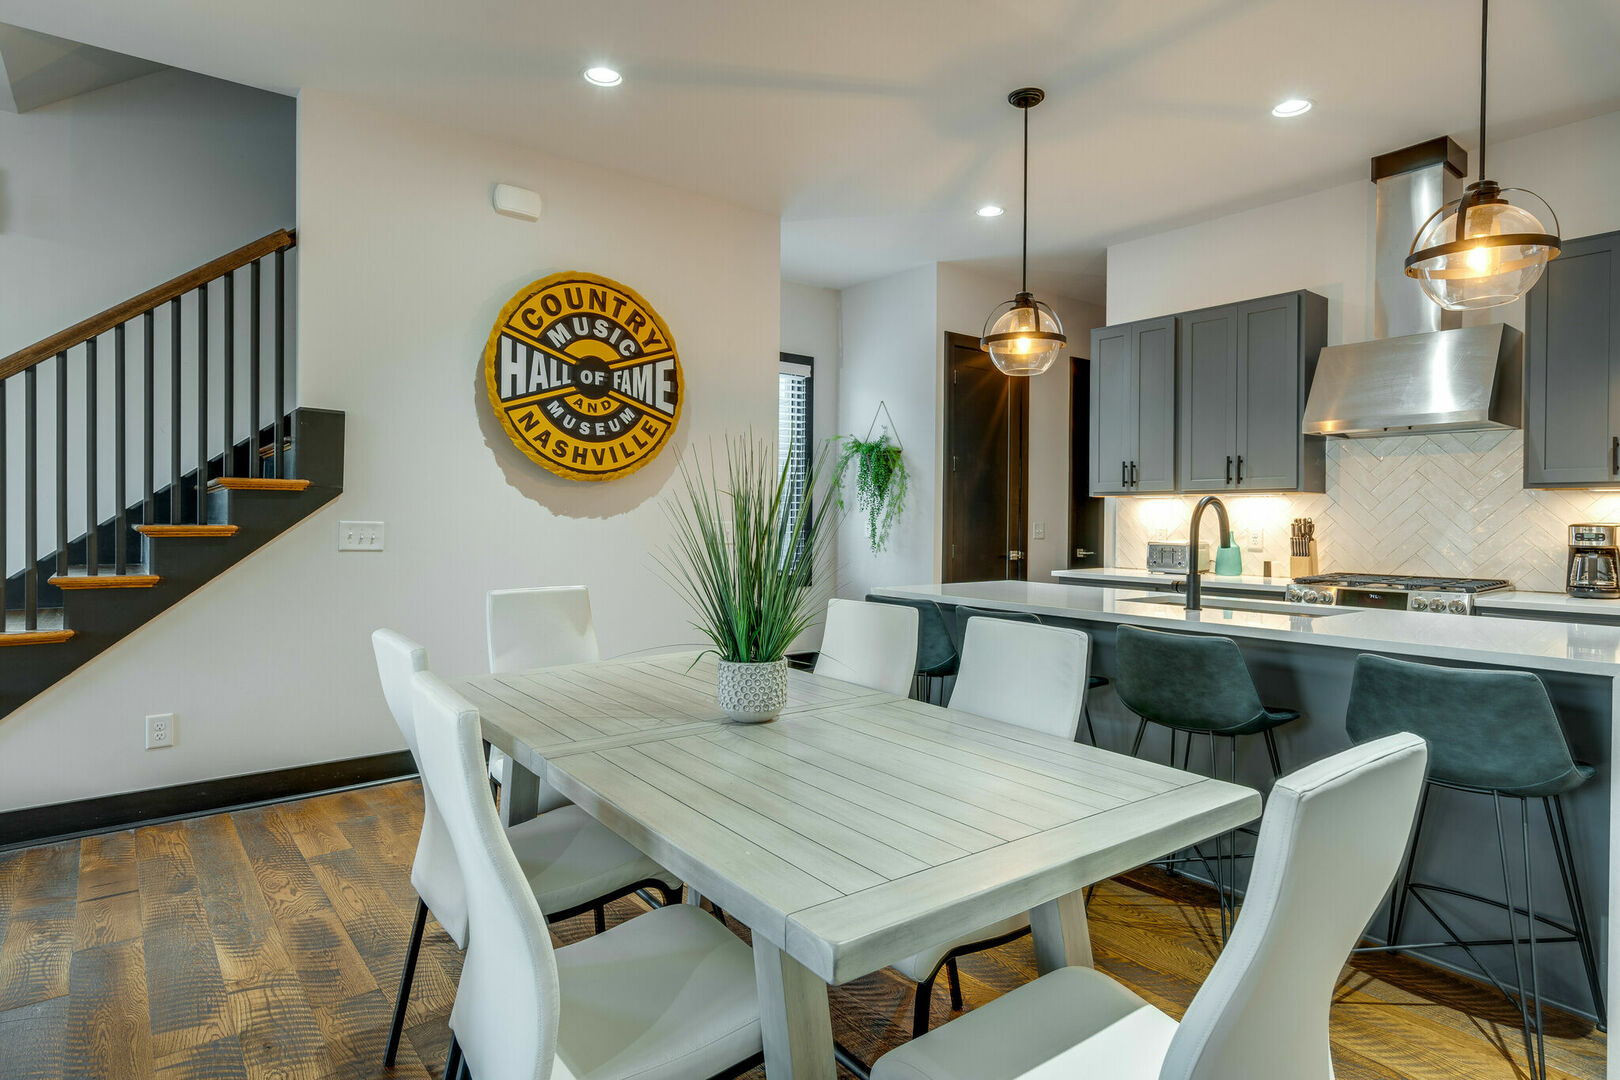 Unit 3: Fully equipped kitchen with stainless steel appliances, breakfast bar seating, and bar stools.